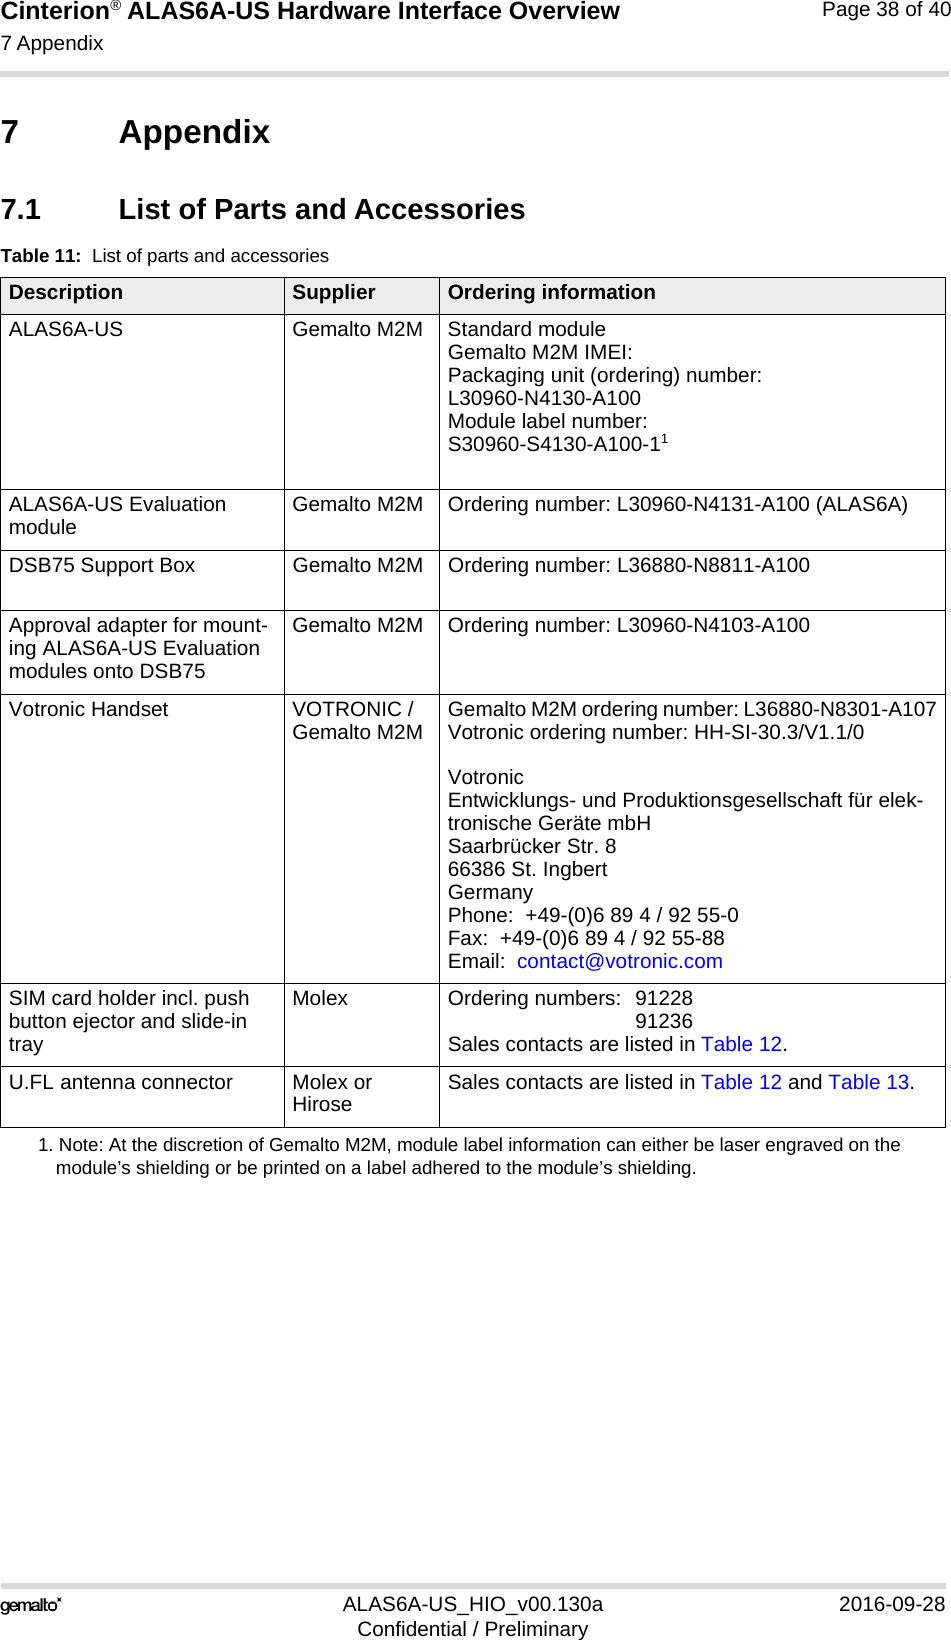 Cinterion® ALAS6A-US Hardware Interface Overview7 Appendix39ALAS6A-US_HIO_v00.130a 2016-09-28Confidential / PreliminaryPage 38 of 407 Appendix7.1 List of Parts and AccessoriesTable 11:  List of parts and accessoriesDescription Supplier Ordering informationALAS6A-US Gemalto M2M Standard module Gemalto M2M IMEI: Packaging unit (ordering) number: L30960-N4130-A100Module label number:S30960-S4130-A100-111. Note: At the discretion of Gemalto M2M, module label information can either be laser engraved on the module’s shielding or be printed on a label adhered to the module’s shielding.ALAS6A-US Evaluation module Gemalto M2M Ordering number: L30960-N4131-A100 (ALAS6A)DSB75 Support Box Gemalto M2M Ordering number: L36880-N8811-A100Approval adapter for mount-ing ALAS6A-US Evaluation modules onto DSB75Gemalto M2M Ordering number: L30960-N4103-A100Votronic Handset VOTRONIC / Gemalto M2M Gemalto M2M ordering number: L36880-N8301-A107Votronic ordering number: HH-SI-30.3/V1.1/0Votronic Entwicklungs- und Produktionsgesellschaft für elek-tronische Geräte mbHSaarbrücker Str. 866386 St. IngbertGermanyPhone:  +49-(0)6 89 4 / 92 55-0Fax:  +49-(0)6 89 4 / 92 55-88Email:  contact@votronic.comSIM card holder incl. push button ejector and slide-in trayMolex Ordering numbers:  91228 91236Sales contacts are listed in Table 12.U.FL antenna connector Molex or Hirose Sales contacts are listed in Table 12 and Table 13.